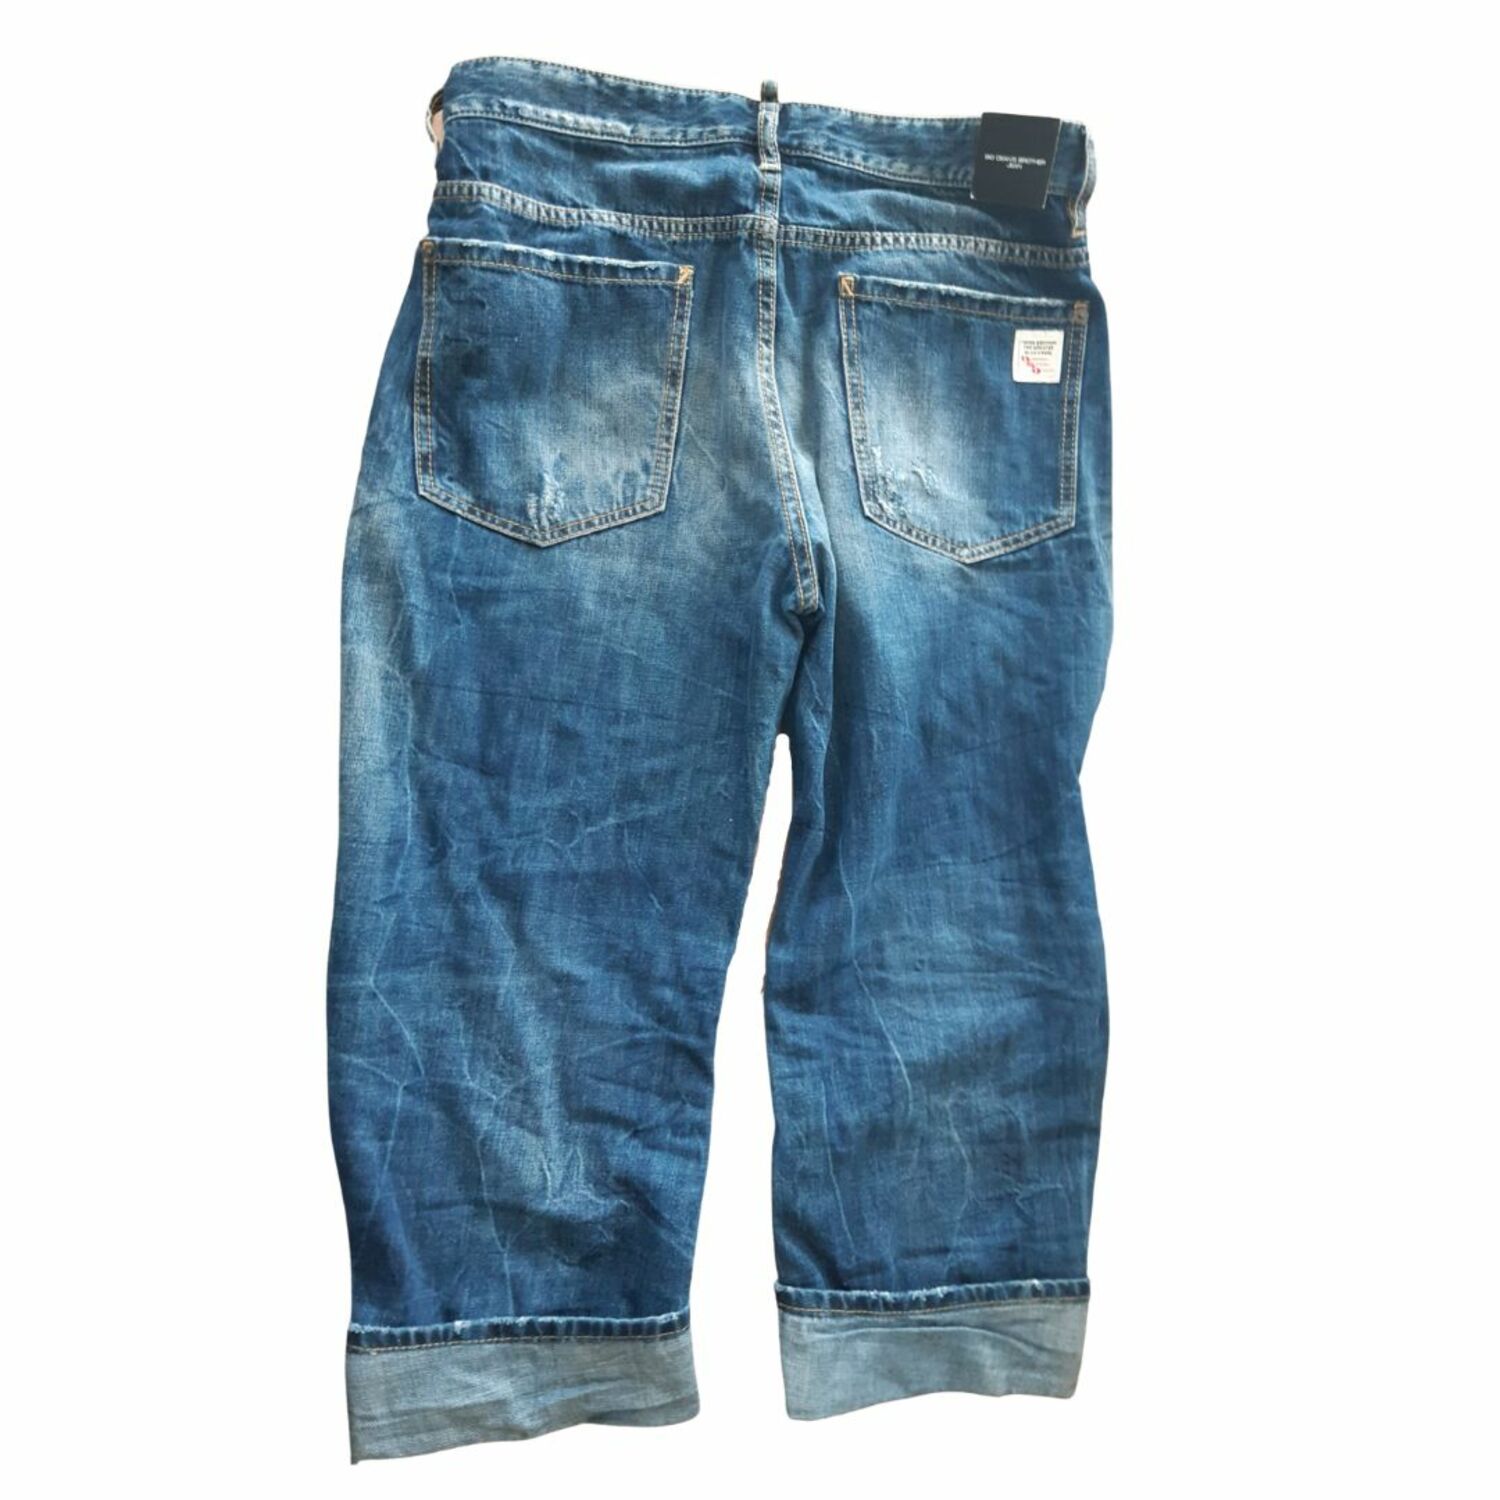 Relaxed fit Jeans Dsquared2 - IT 48, buy pre-owned at 250 EUR